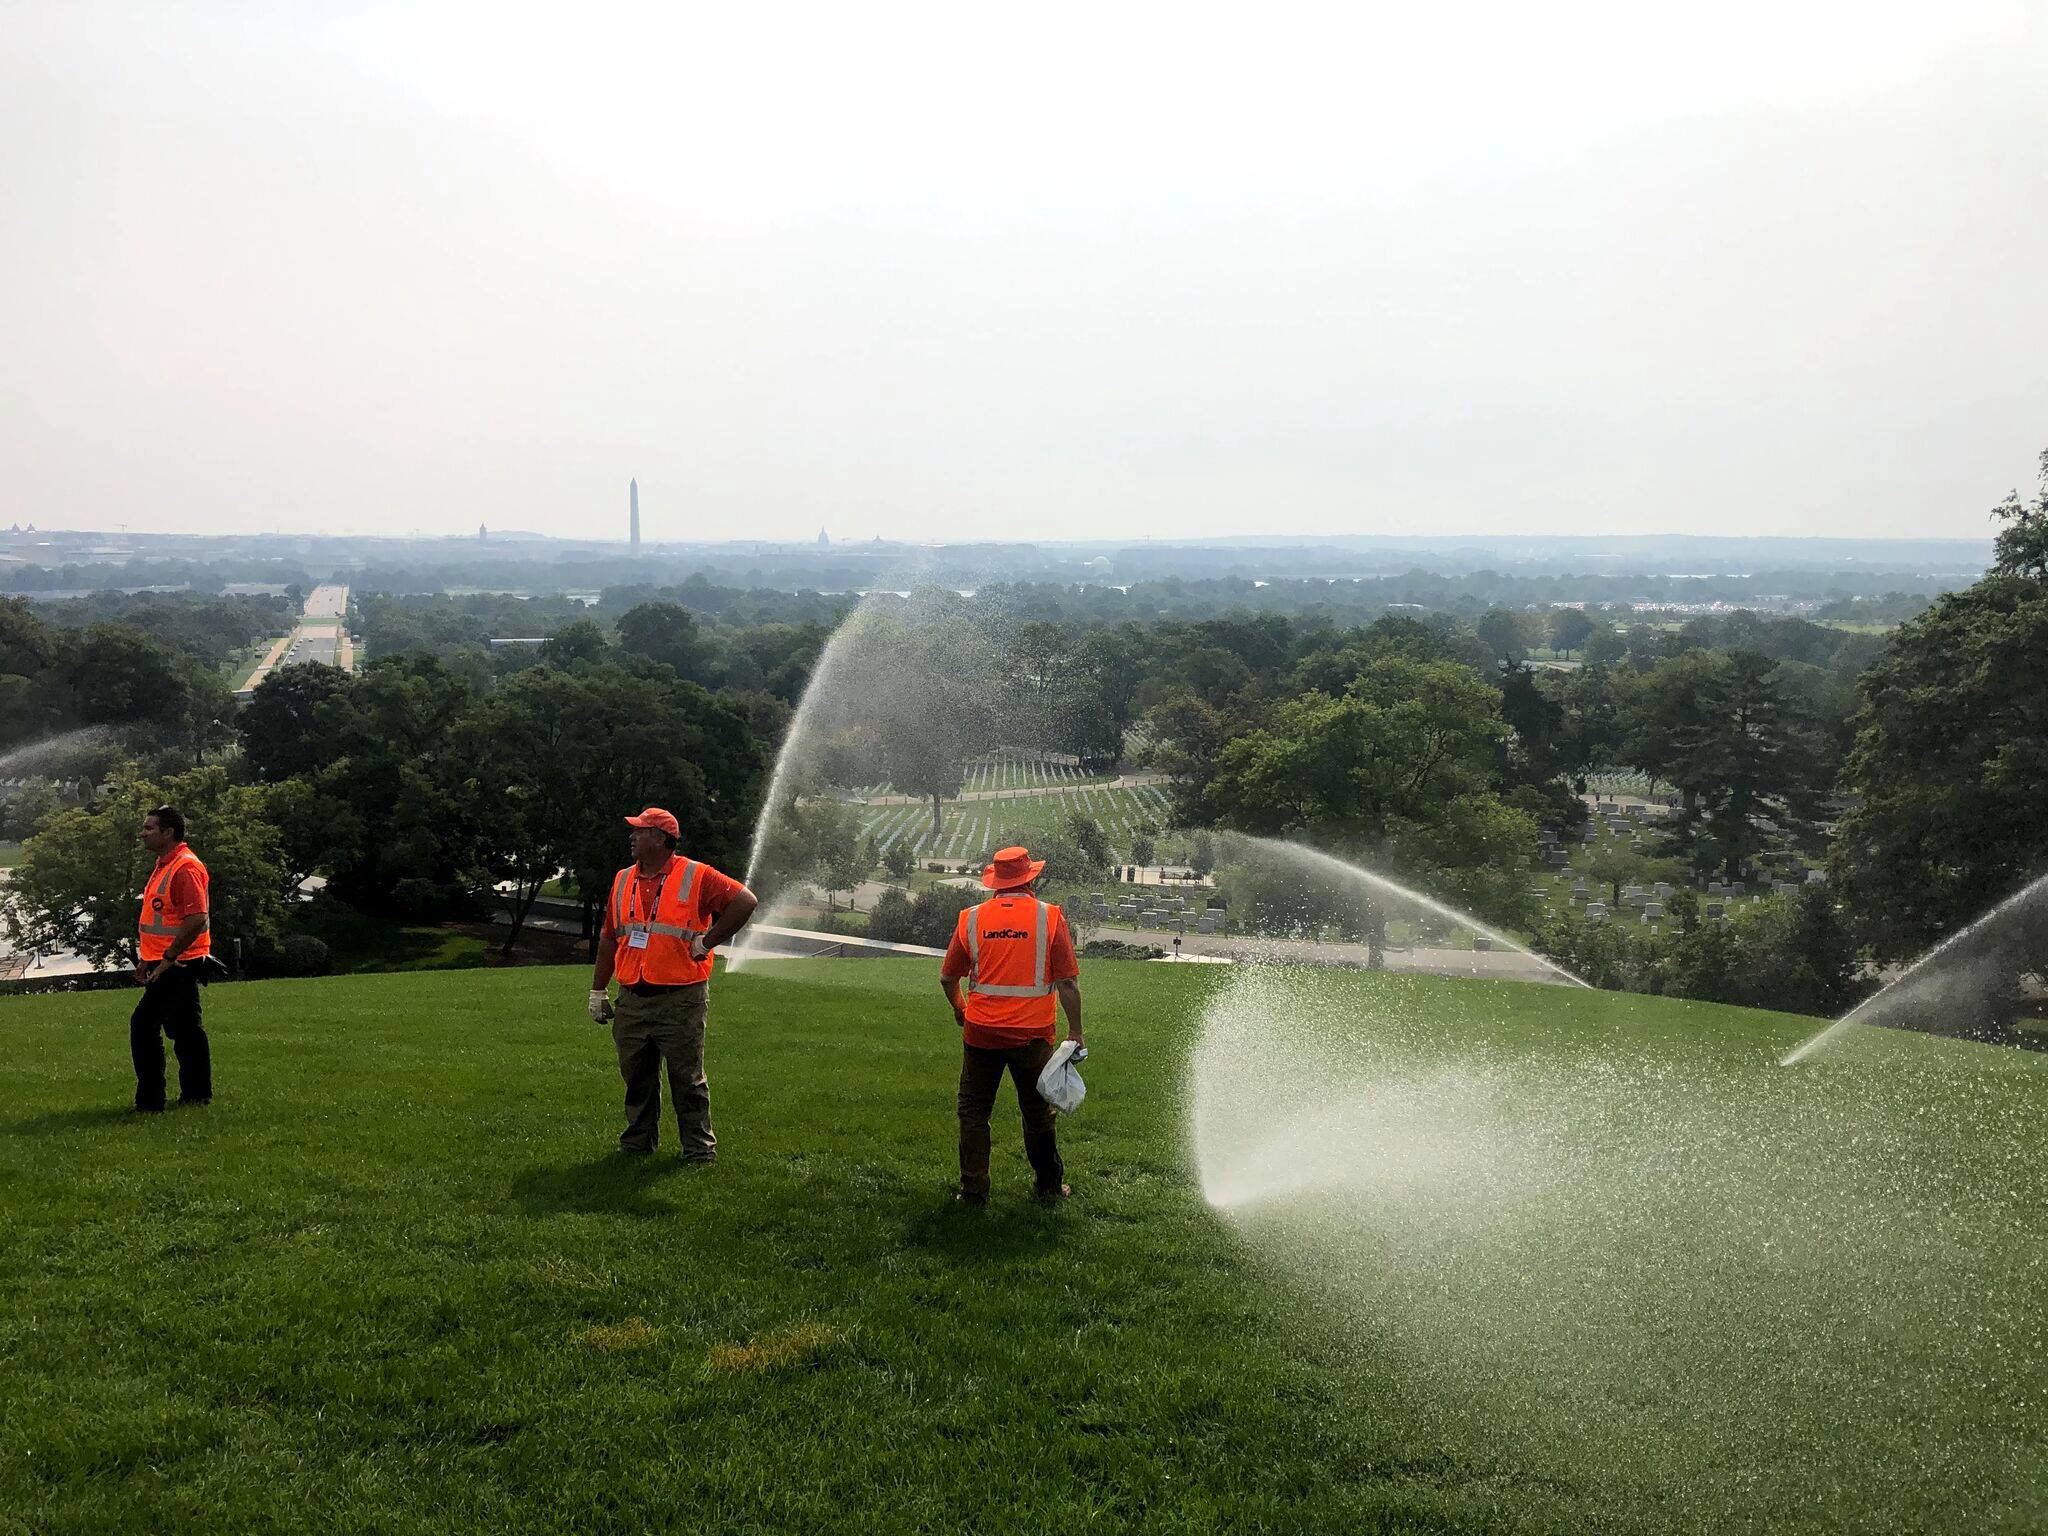 LandCare helps restore Arlington National Cemetery as part of Renewal & Remembrance event